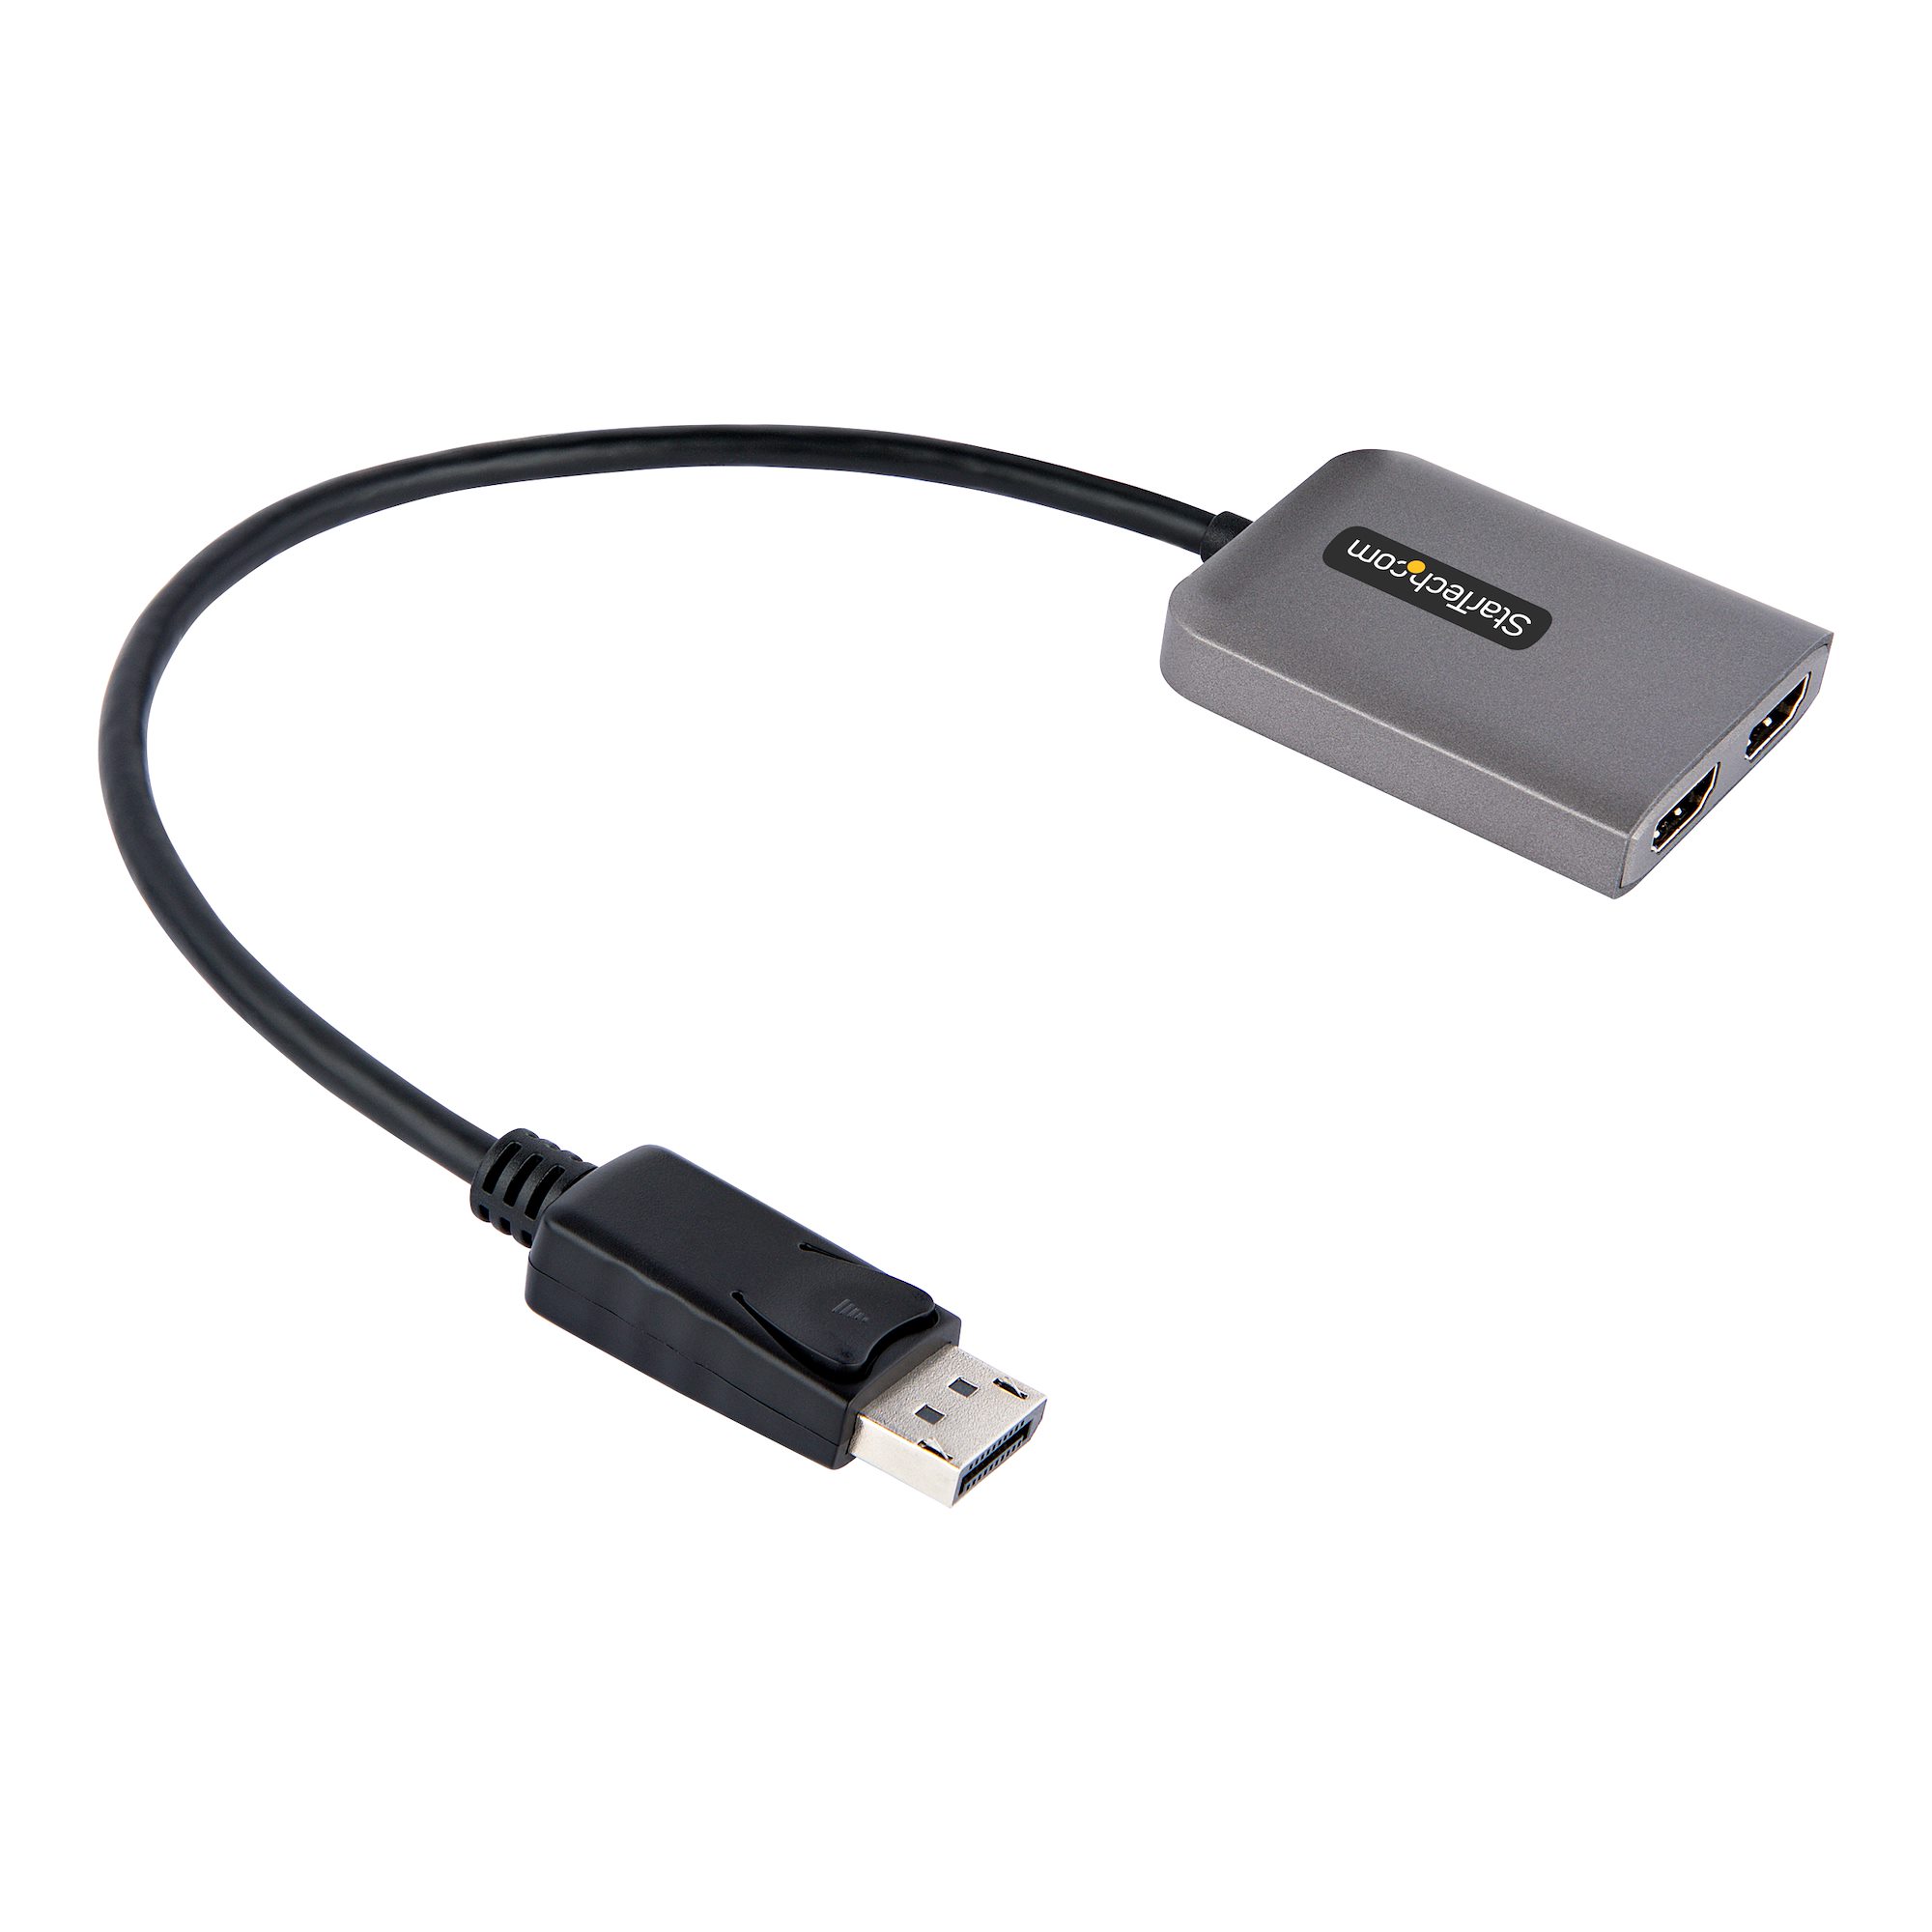 Shop  StarTech.com New MST14CD122HD available with Dual 4K 60Hz - Multiple  monitor USB C adapter for laptop works with USB Type-C DP Alt-mode Windows  PCs to connect up to 2 independent